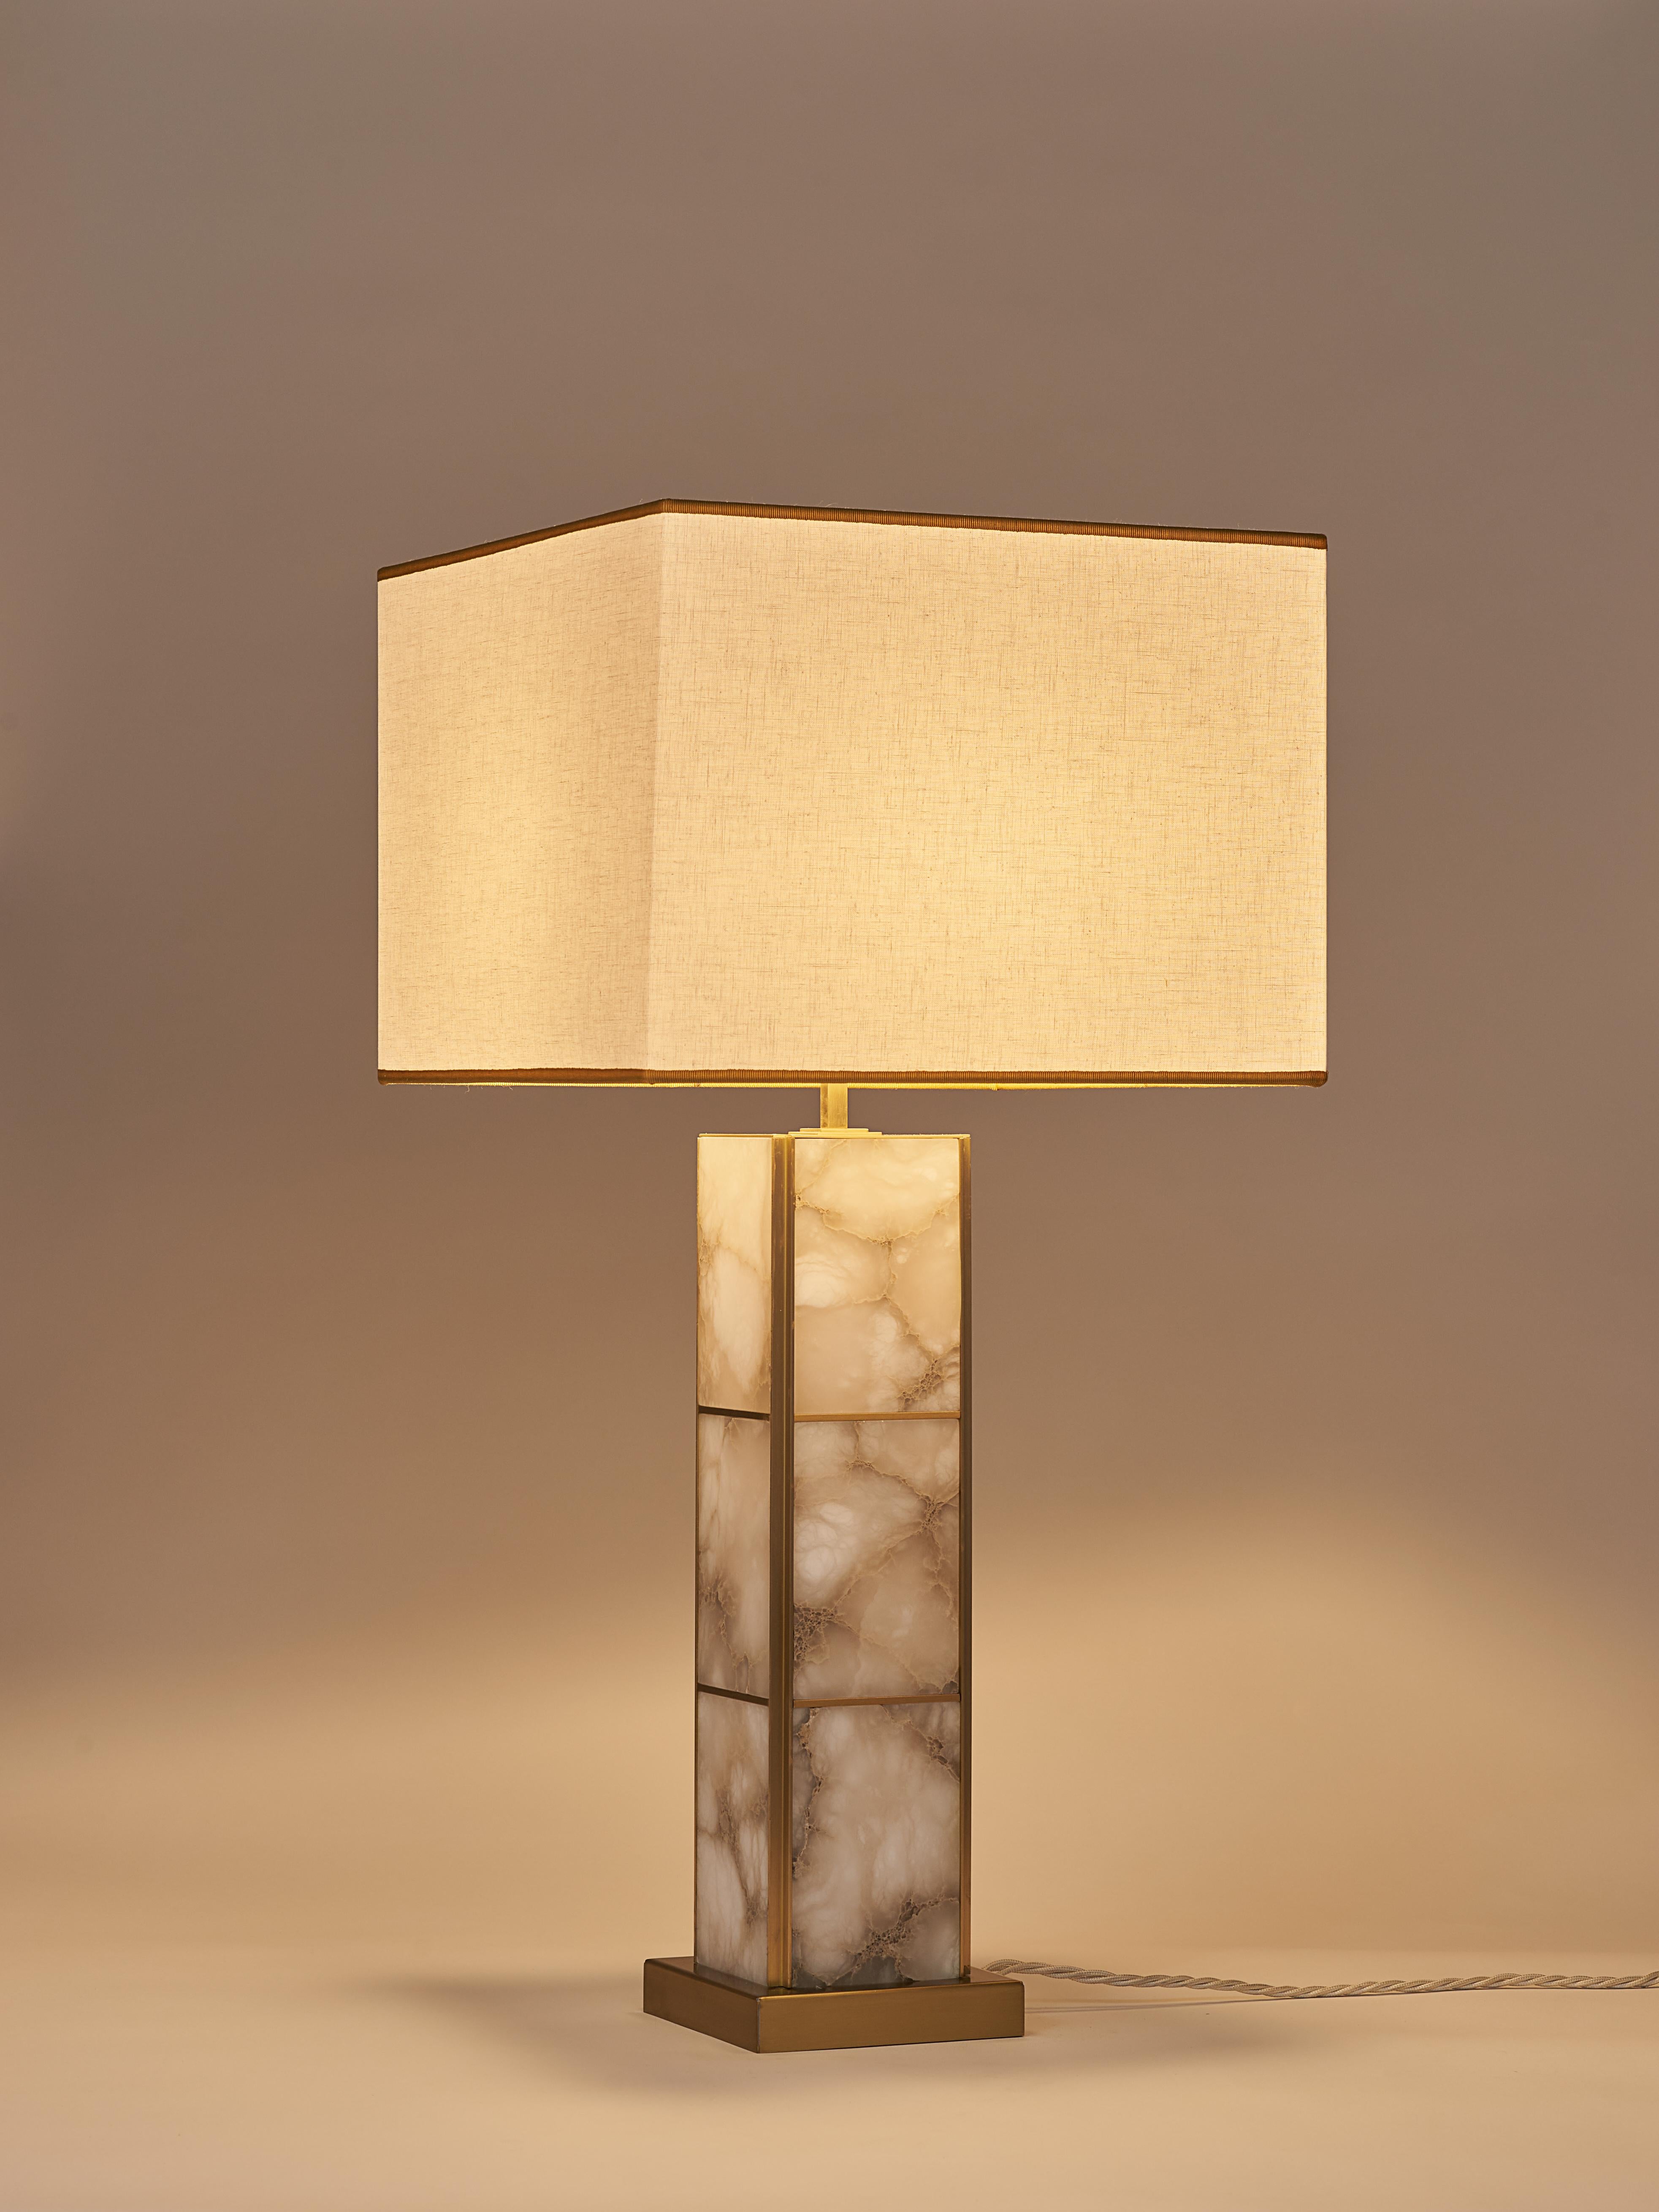 The Mole table lamp is characterized by a monolithic linear structure in brass and veined alabaster which gives it a modern and timeless aesthetic, perfect for different interior styles. Satin brass adds a touch of sophistication and warmth, while